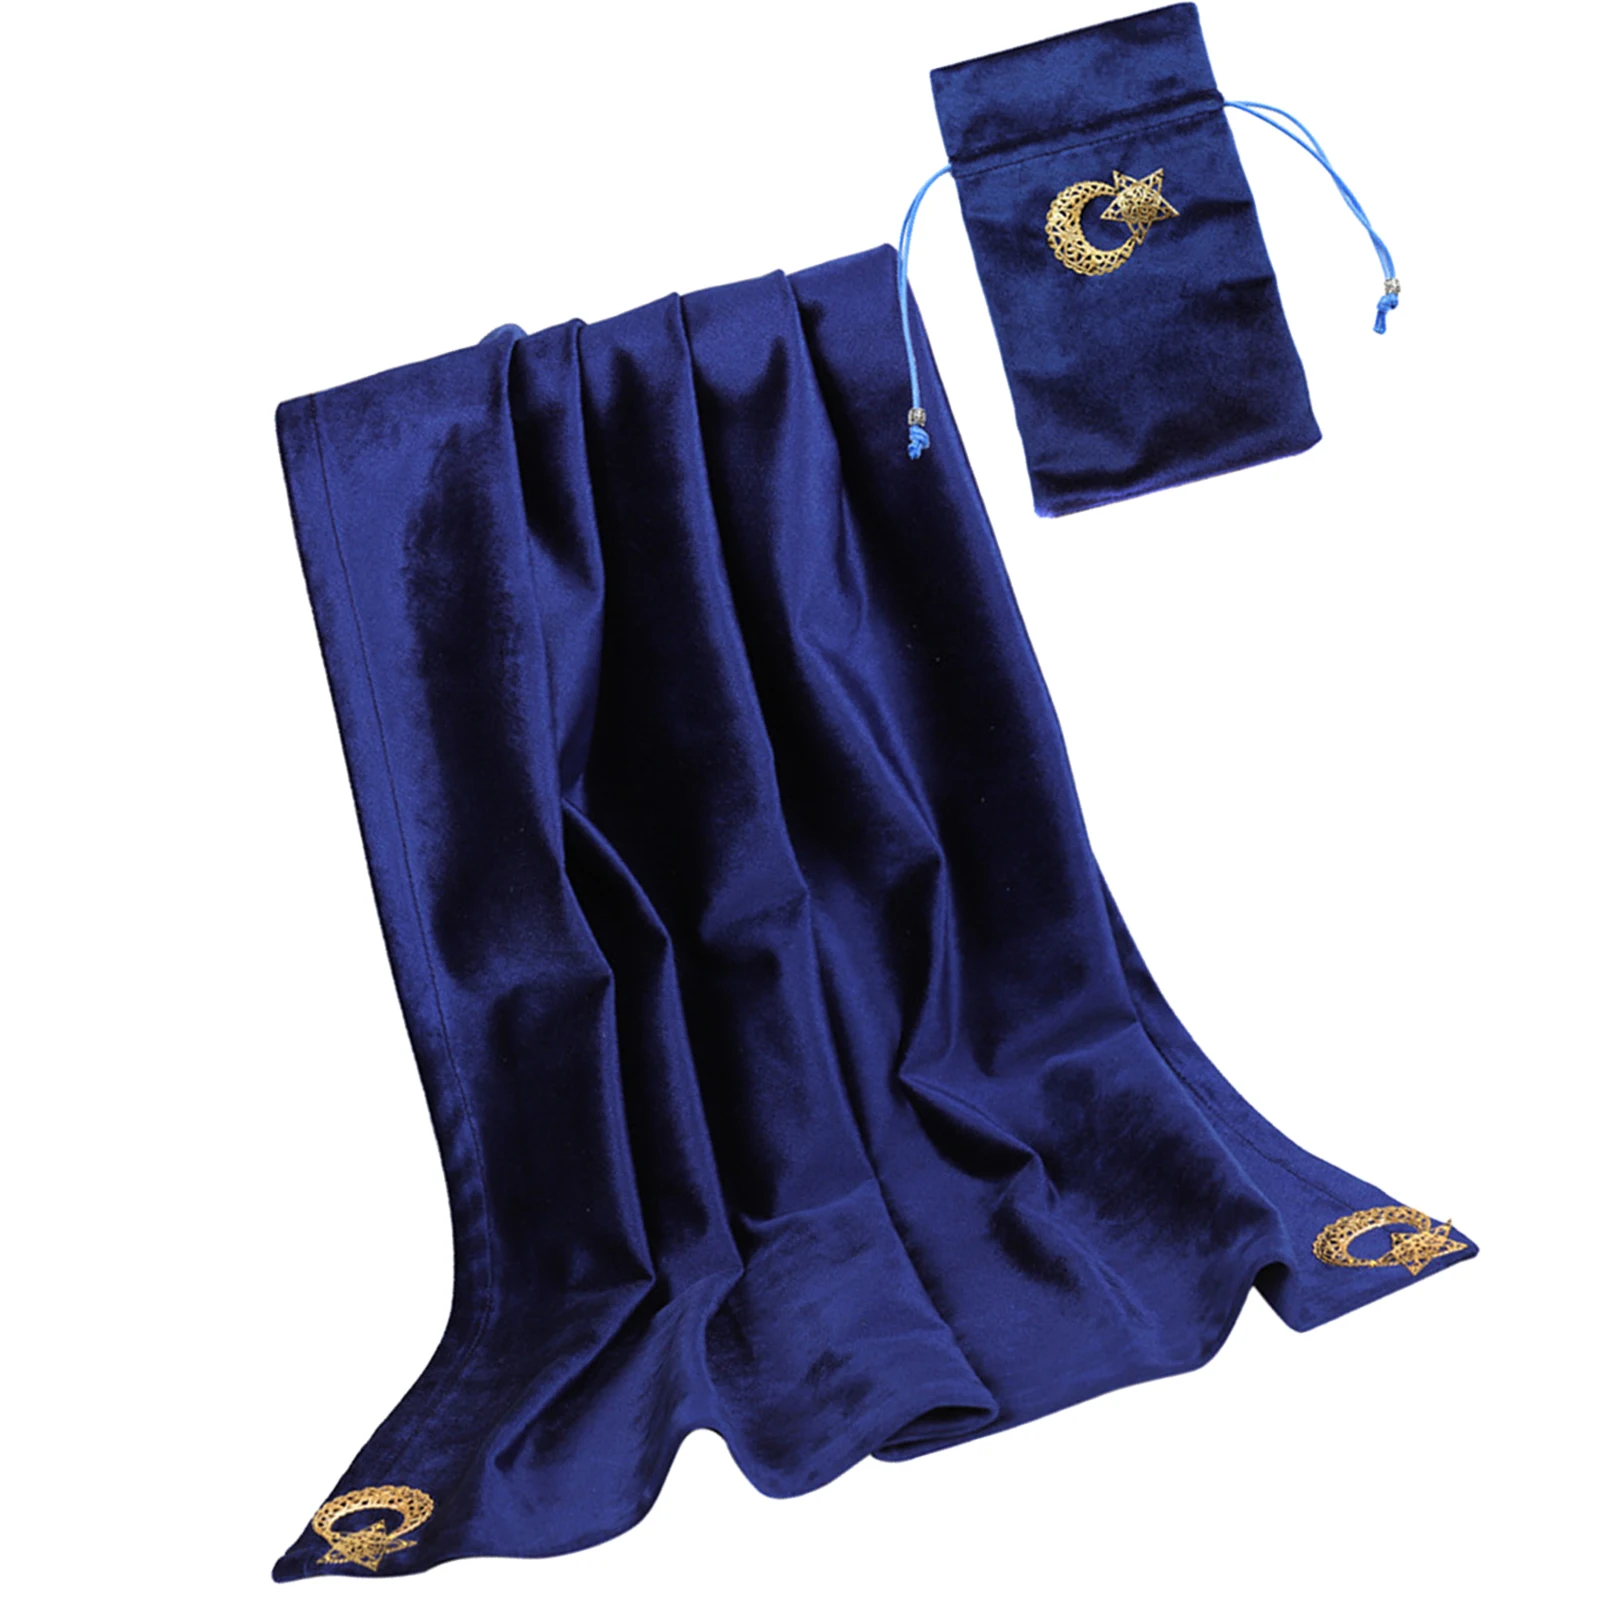 Classic Tarot Thick Velvet Table Cloth Astrology Card Games Square Moon & Star Pattern Tablecloth w/ Drawstring Pouch